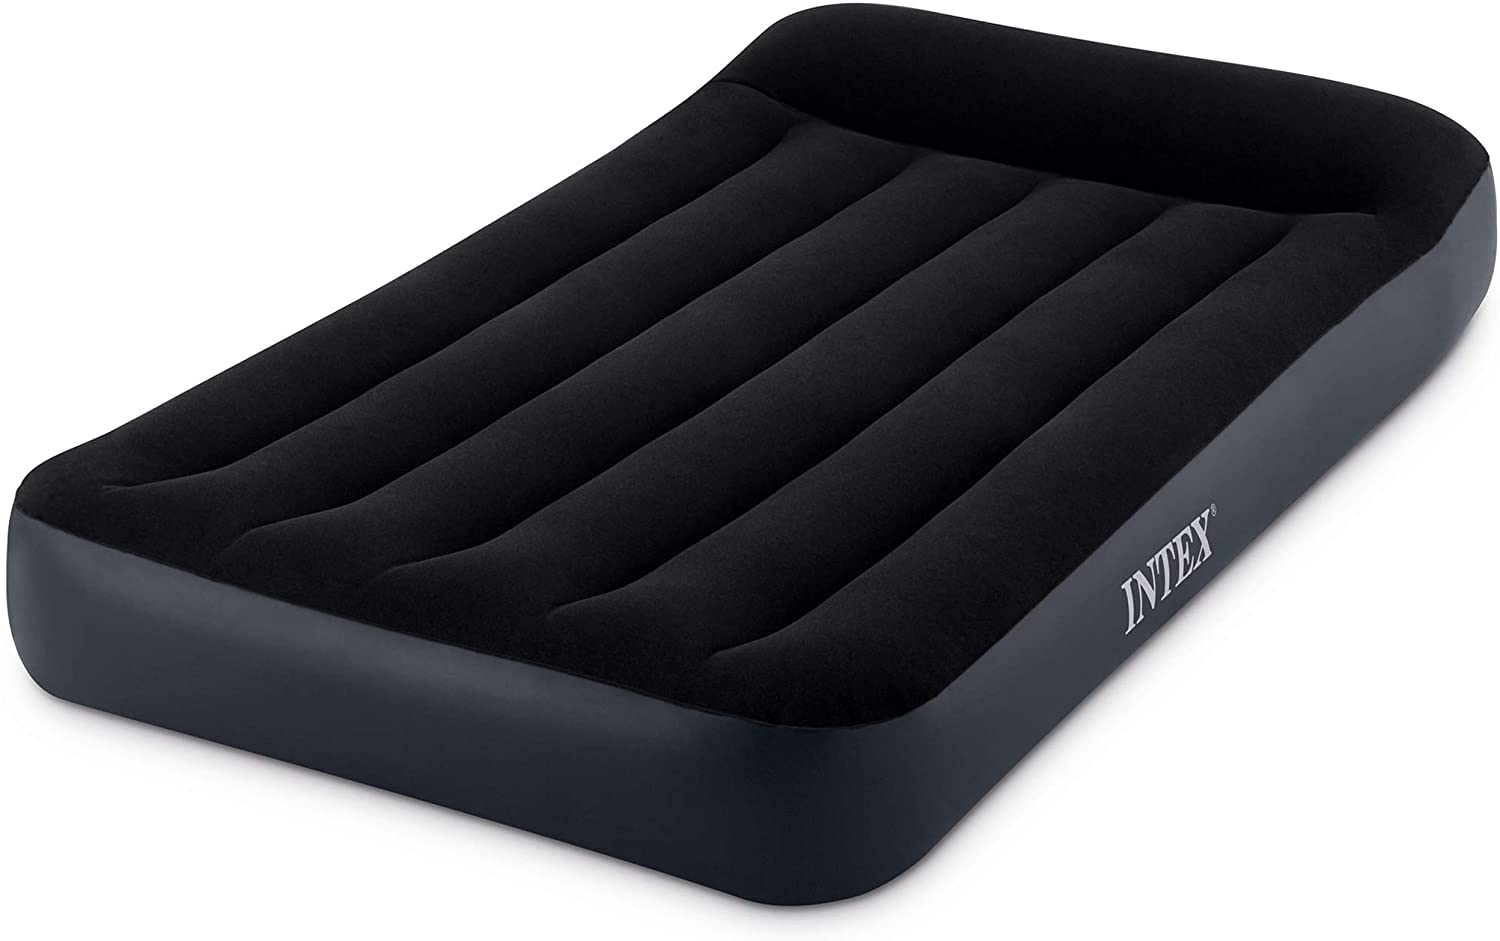 Twin Xl Air Mattress Best For Travelling And Camping